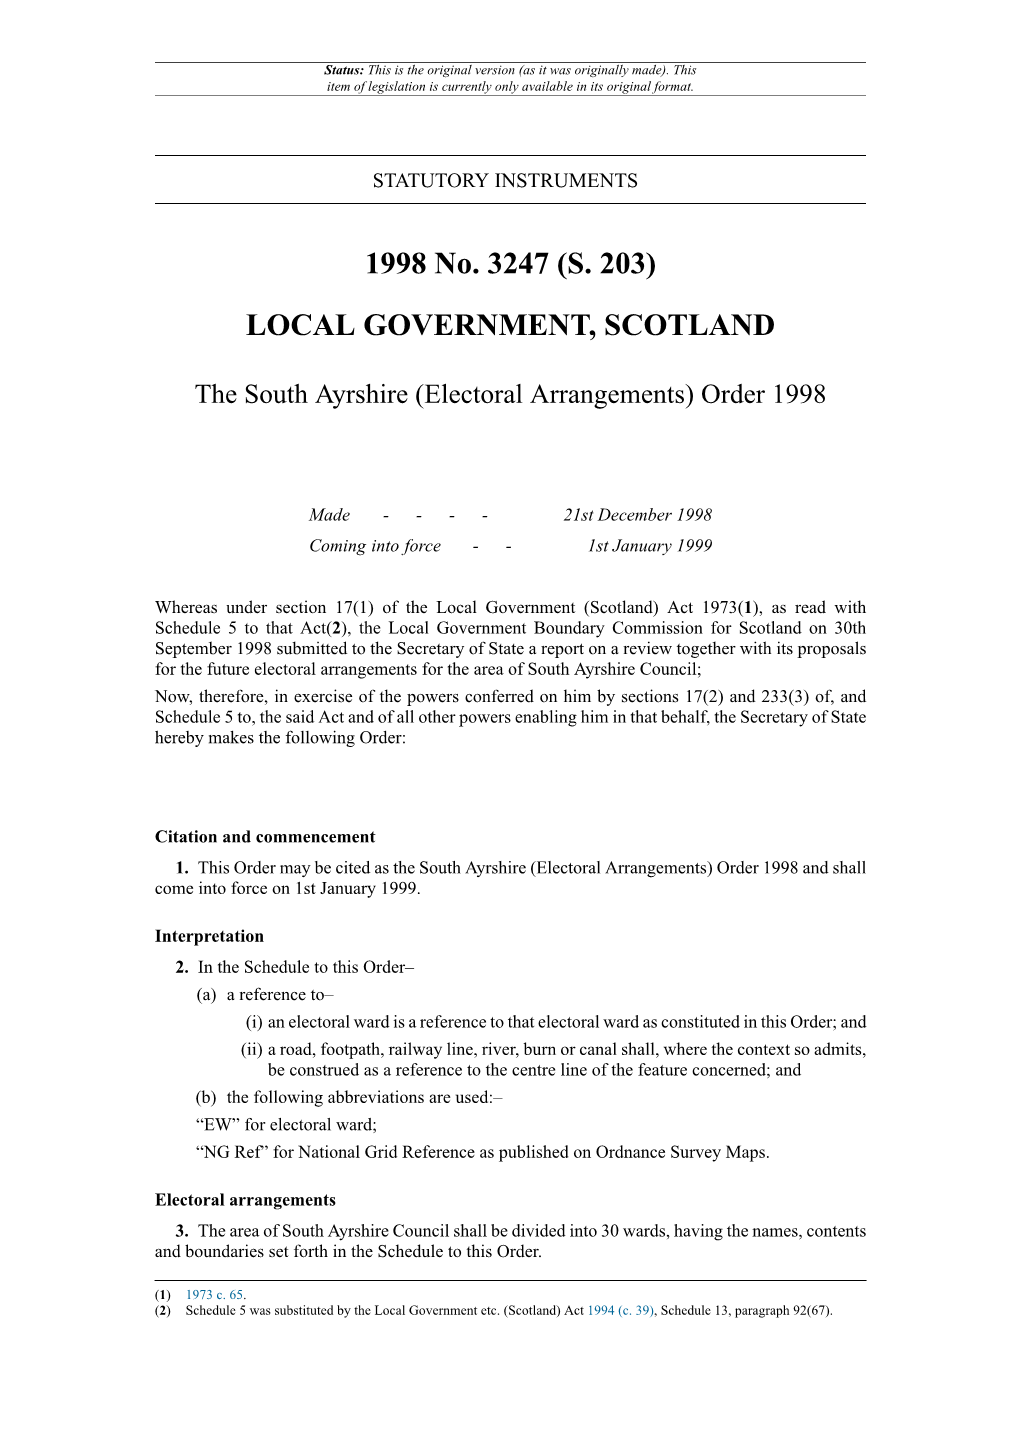 The South Ayrshire (Electoral Arrangements) Order 1998